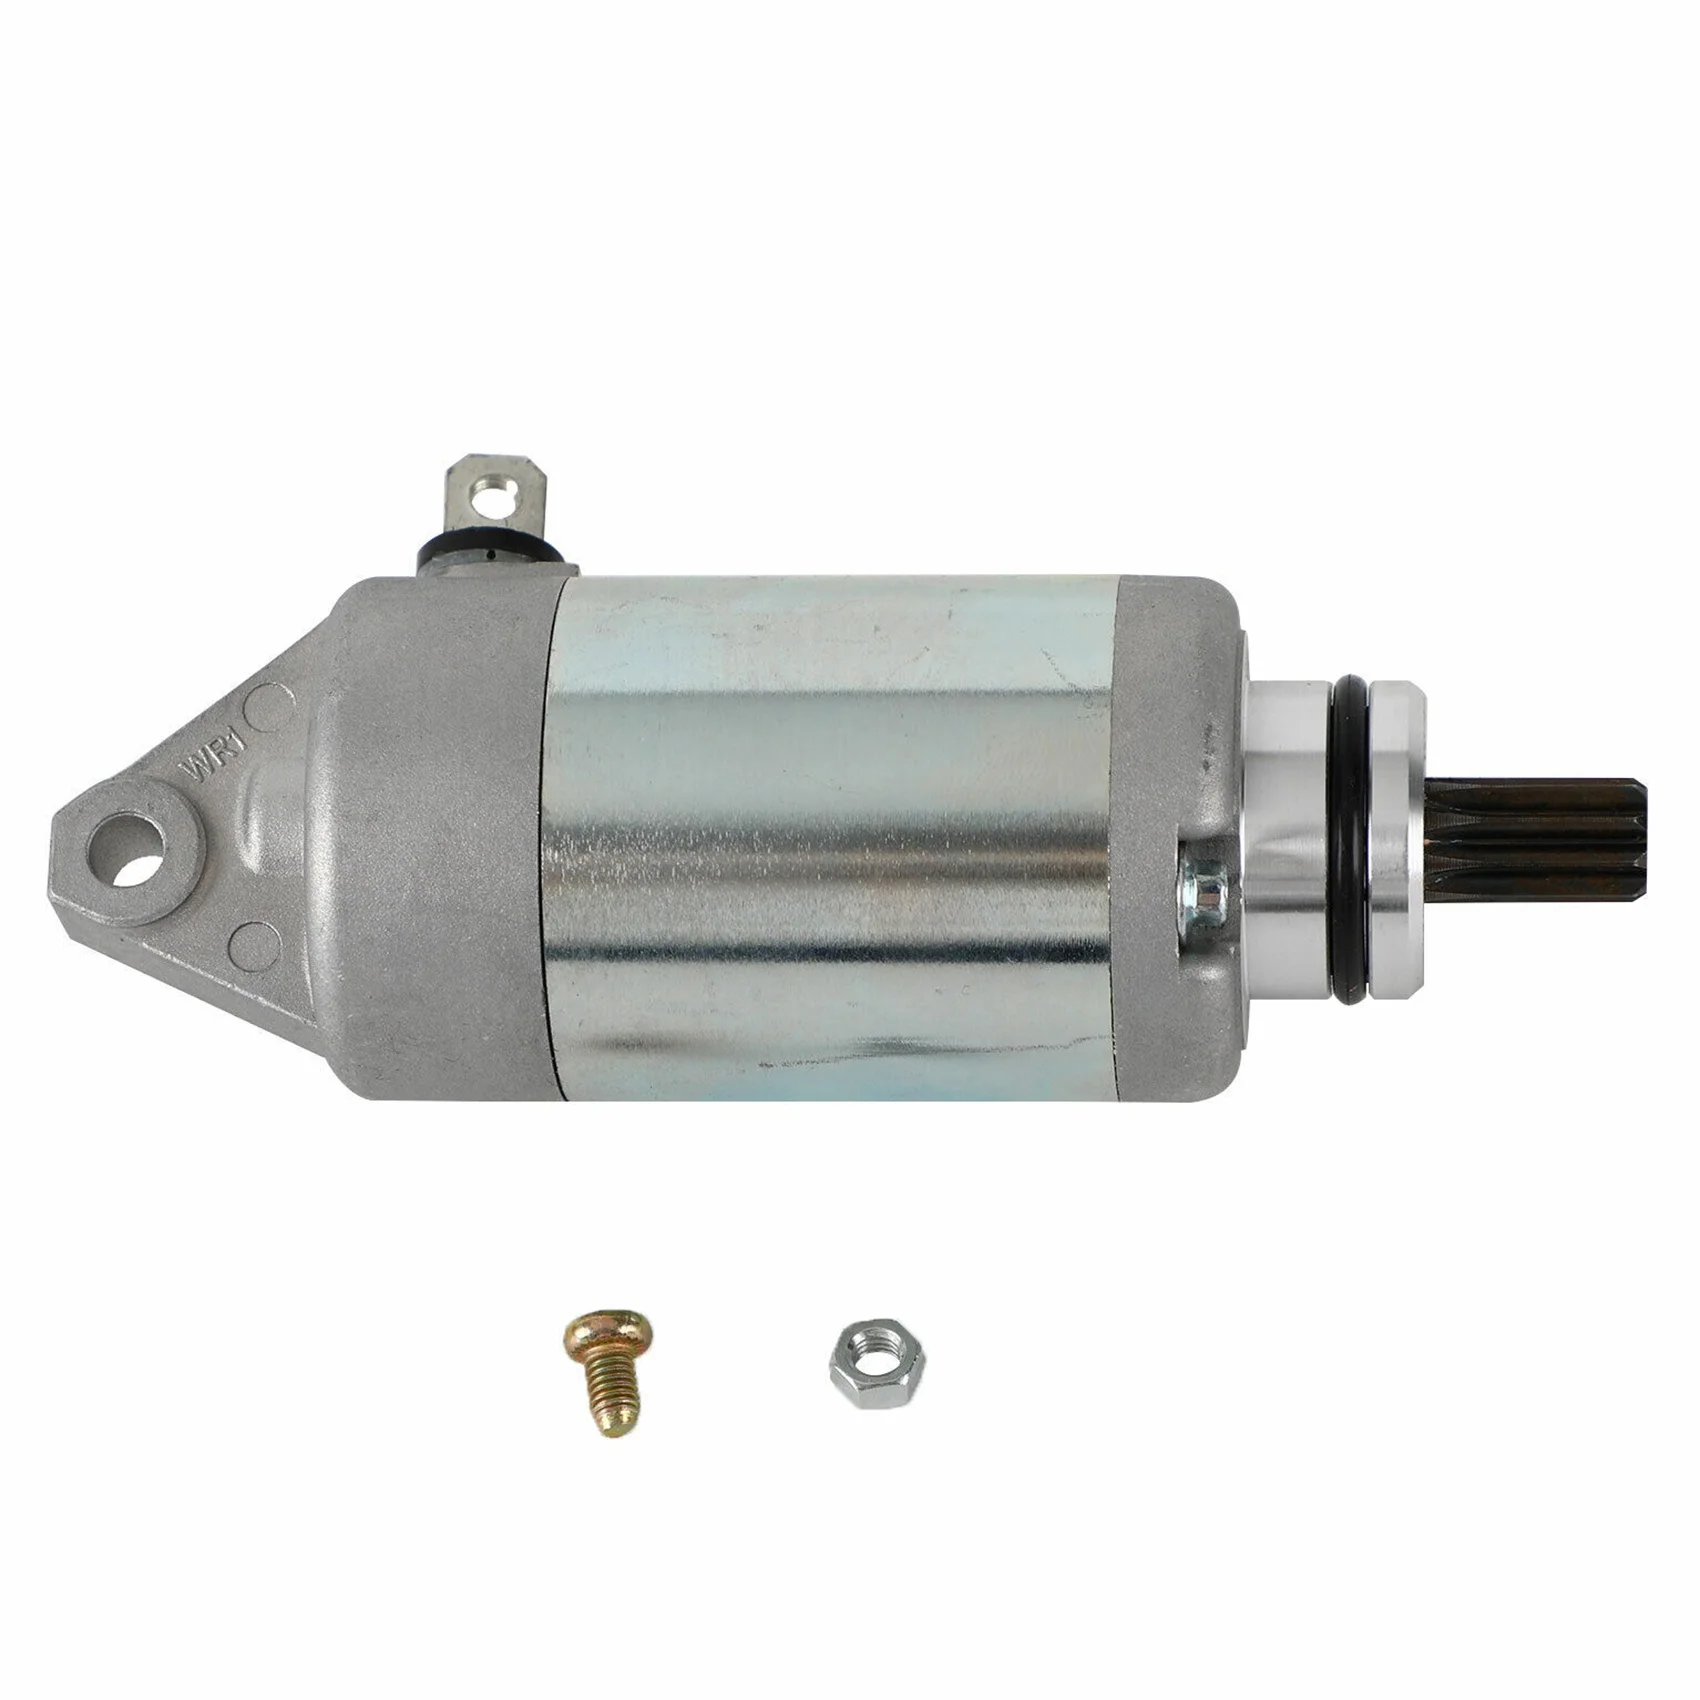 

Starter Motor Fit for -Yamaha WR250F YZ250FX 2015-2019 2GB-81890-01 2GB-81890-00